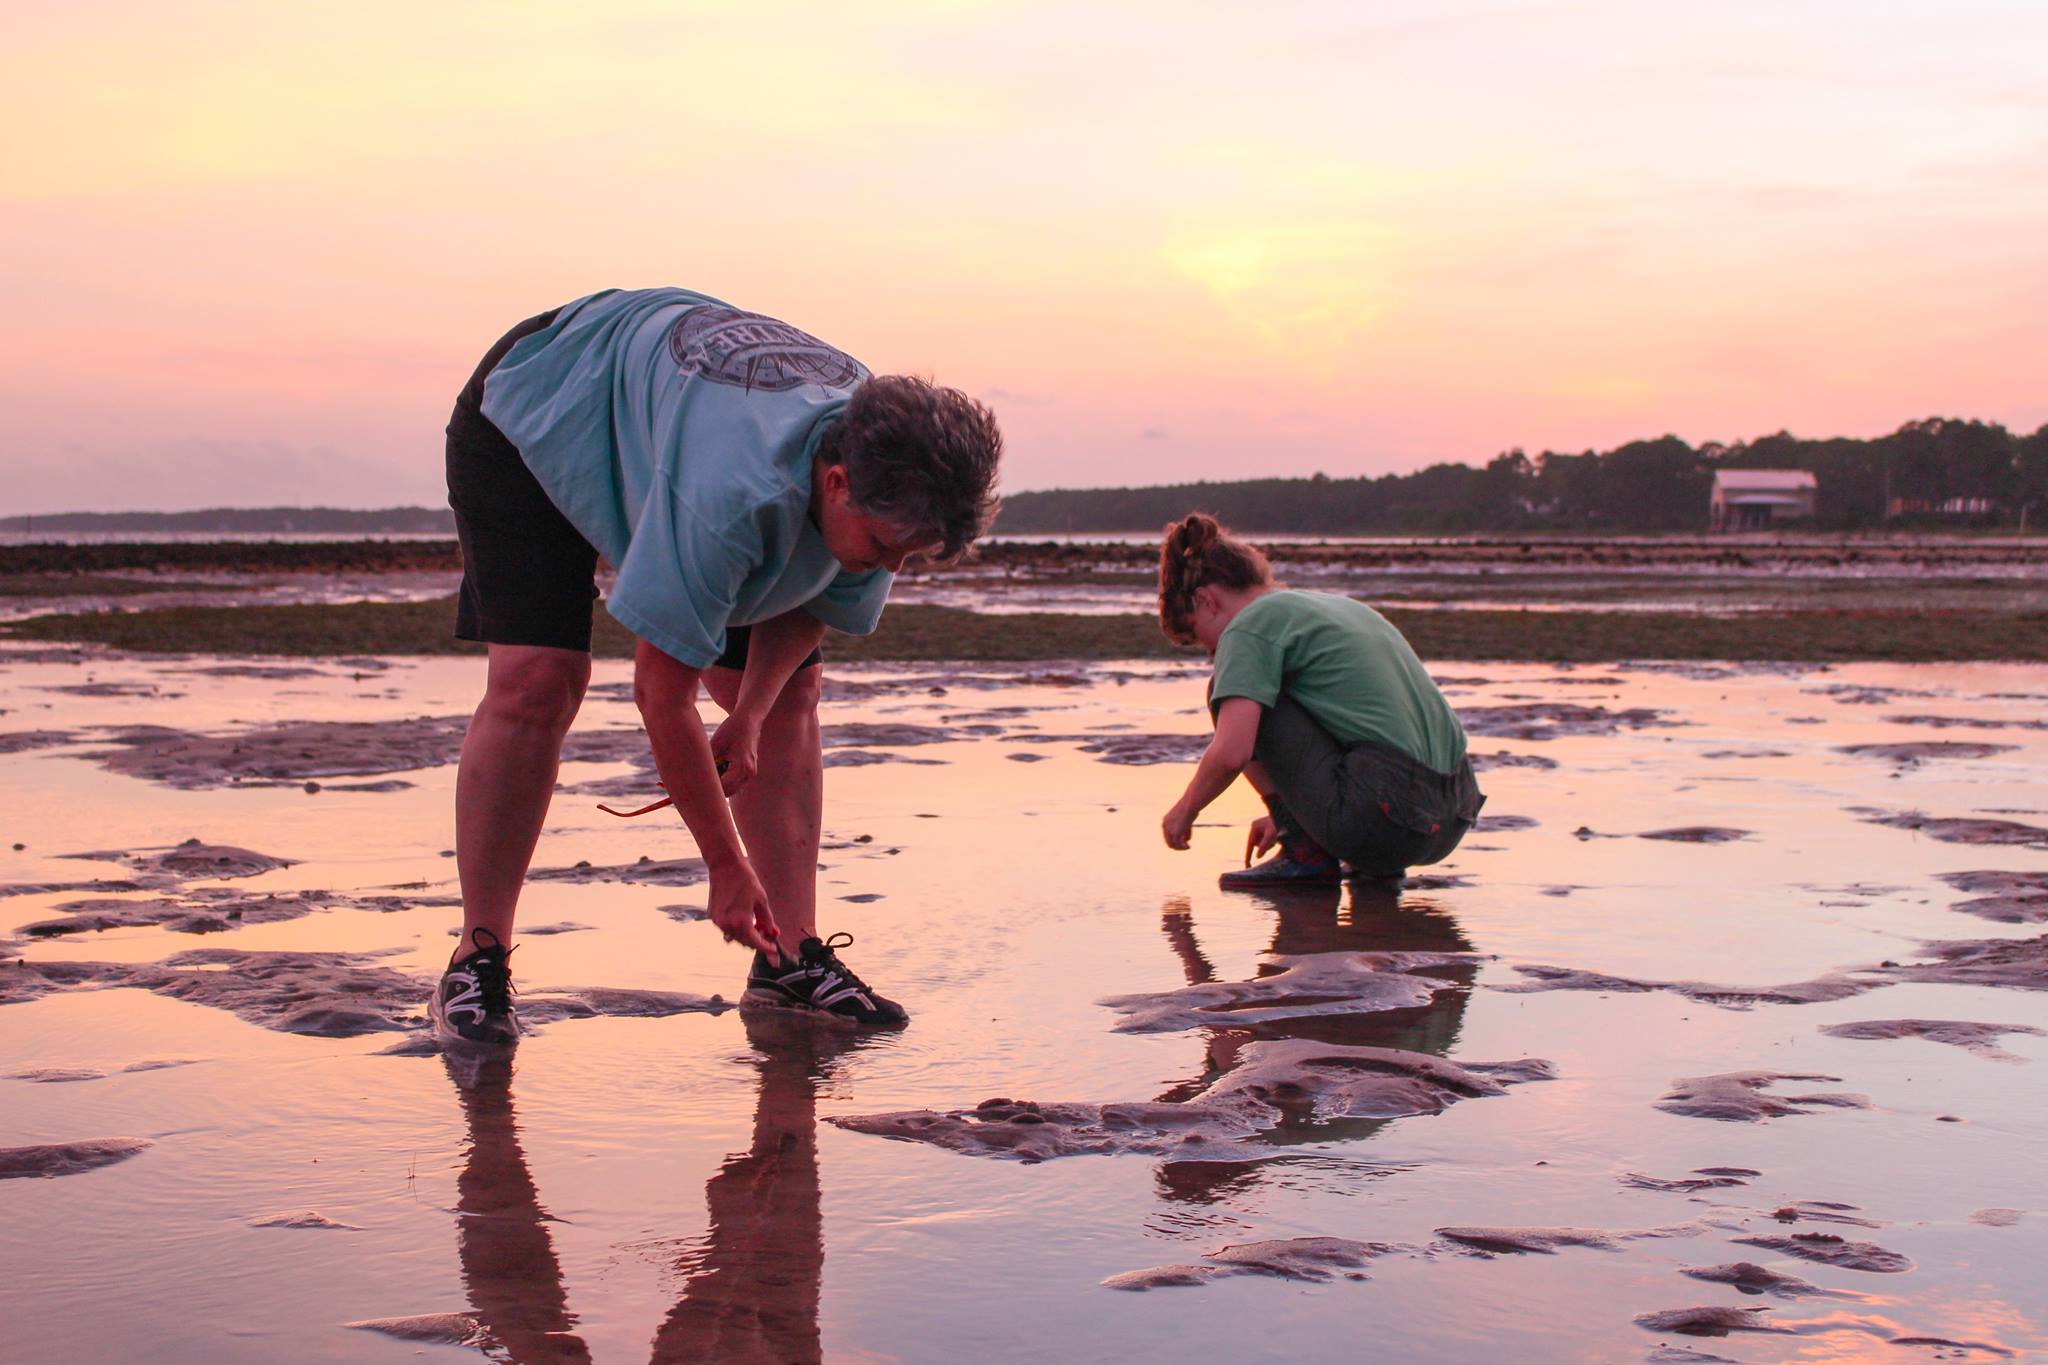 Two people bend down to examine things along the ocean shore